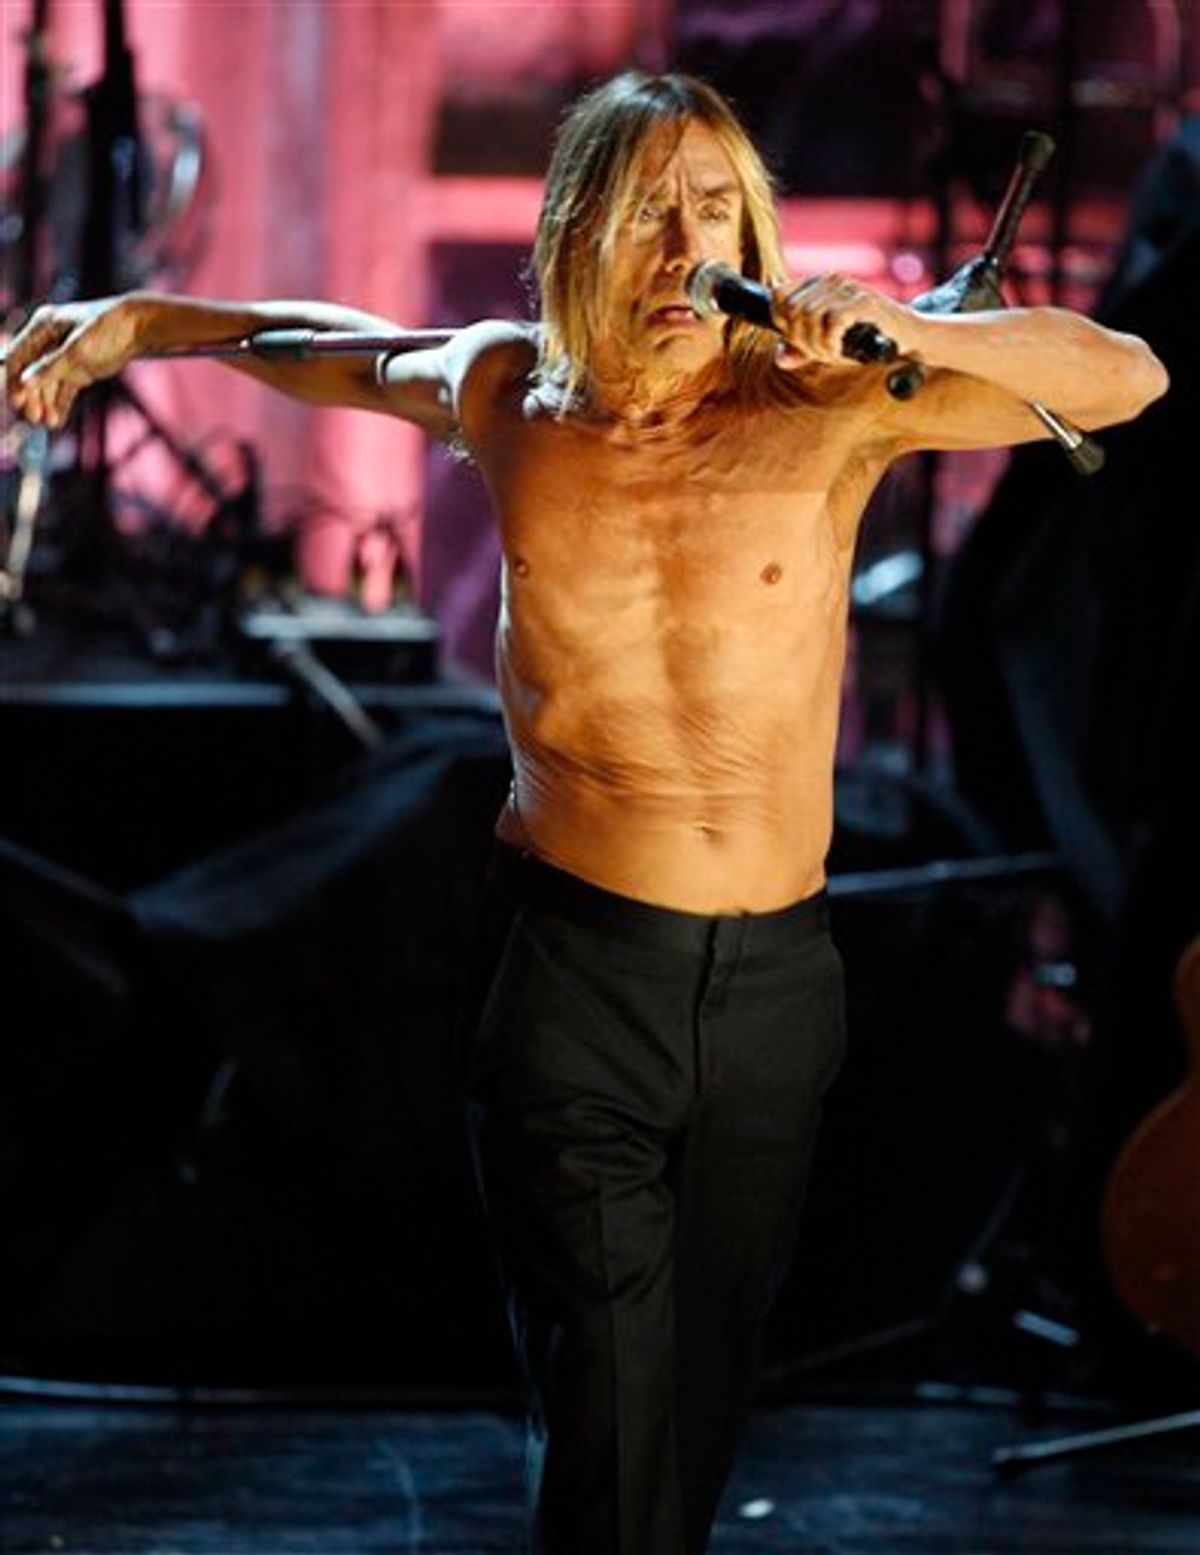 Iggy Pop performs during the Rock and Roll Hall of Fame induction ceremony in New York, Monday, March 15, 2010.  (AP Photo/Jason DeCrow) (AP)